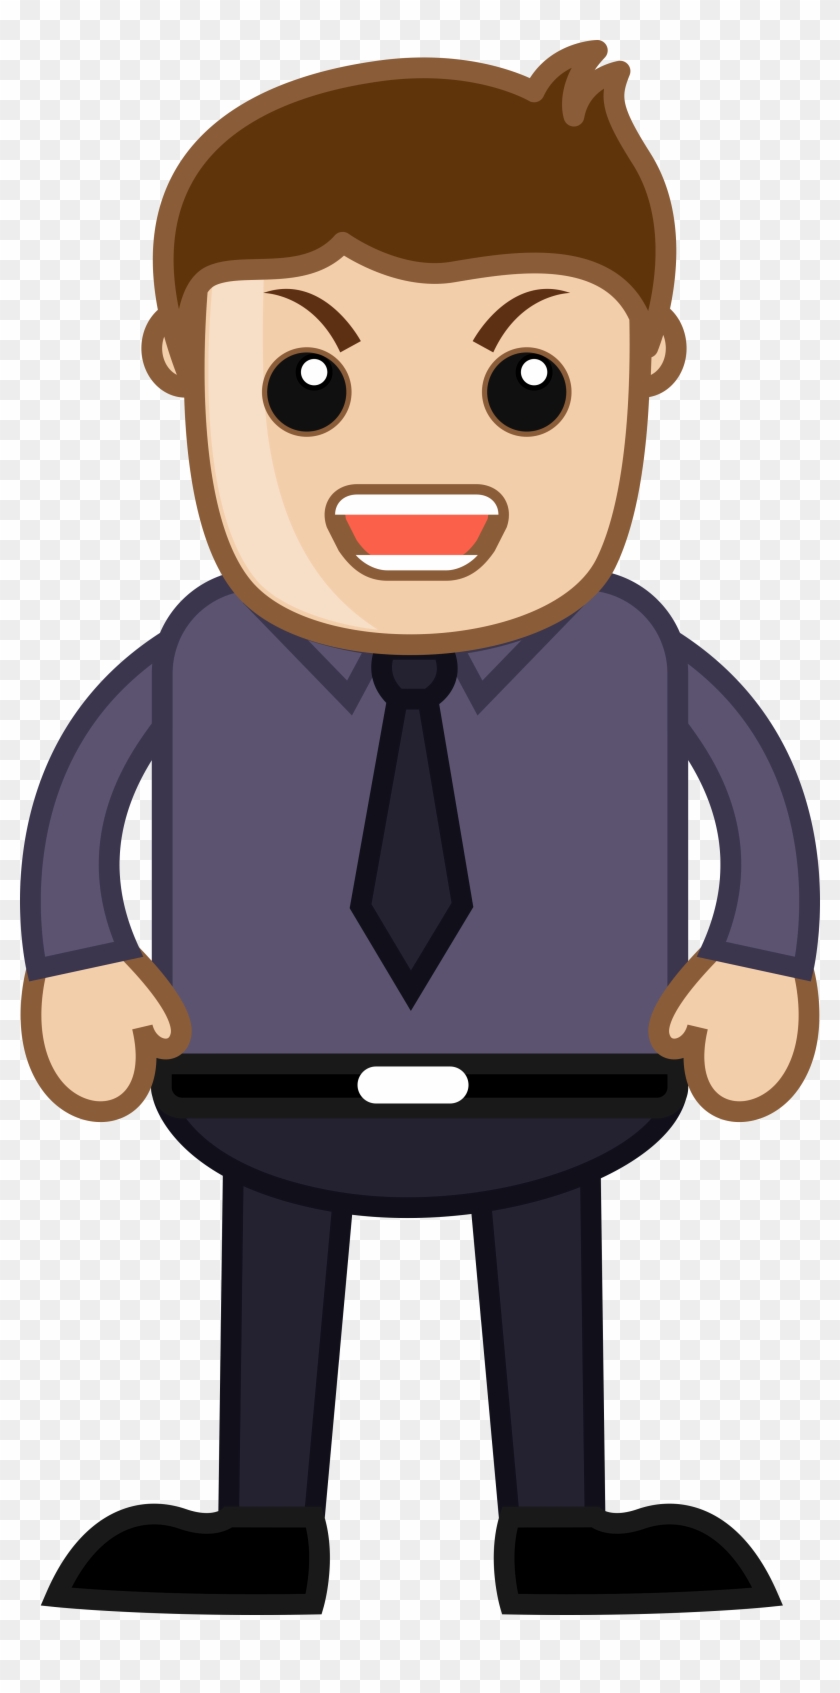 Clipart Person Holding Books - Png Download